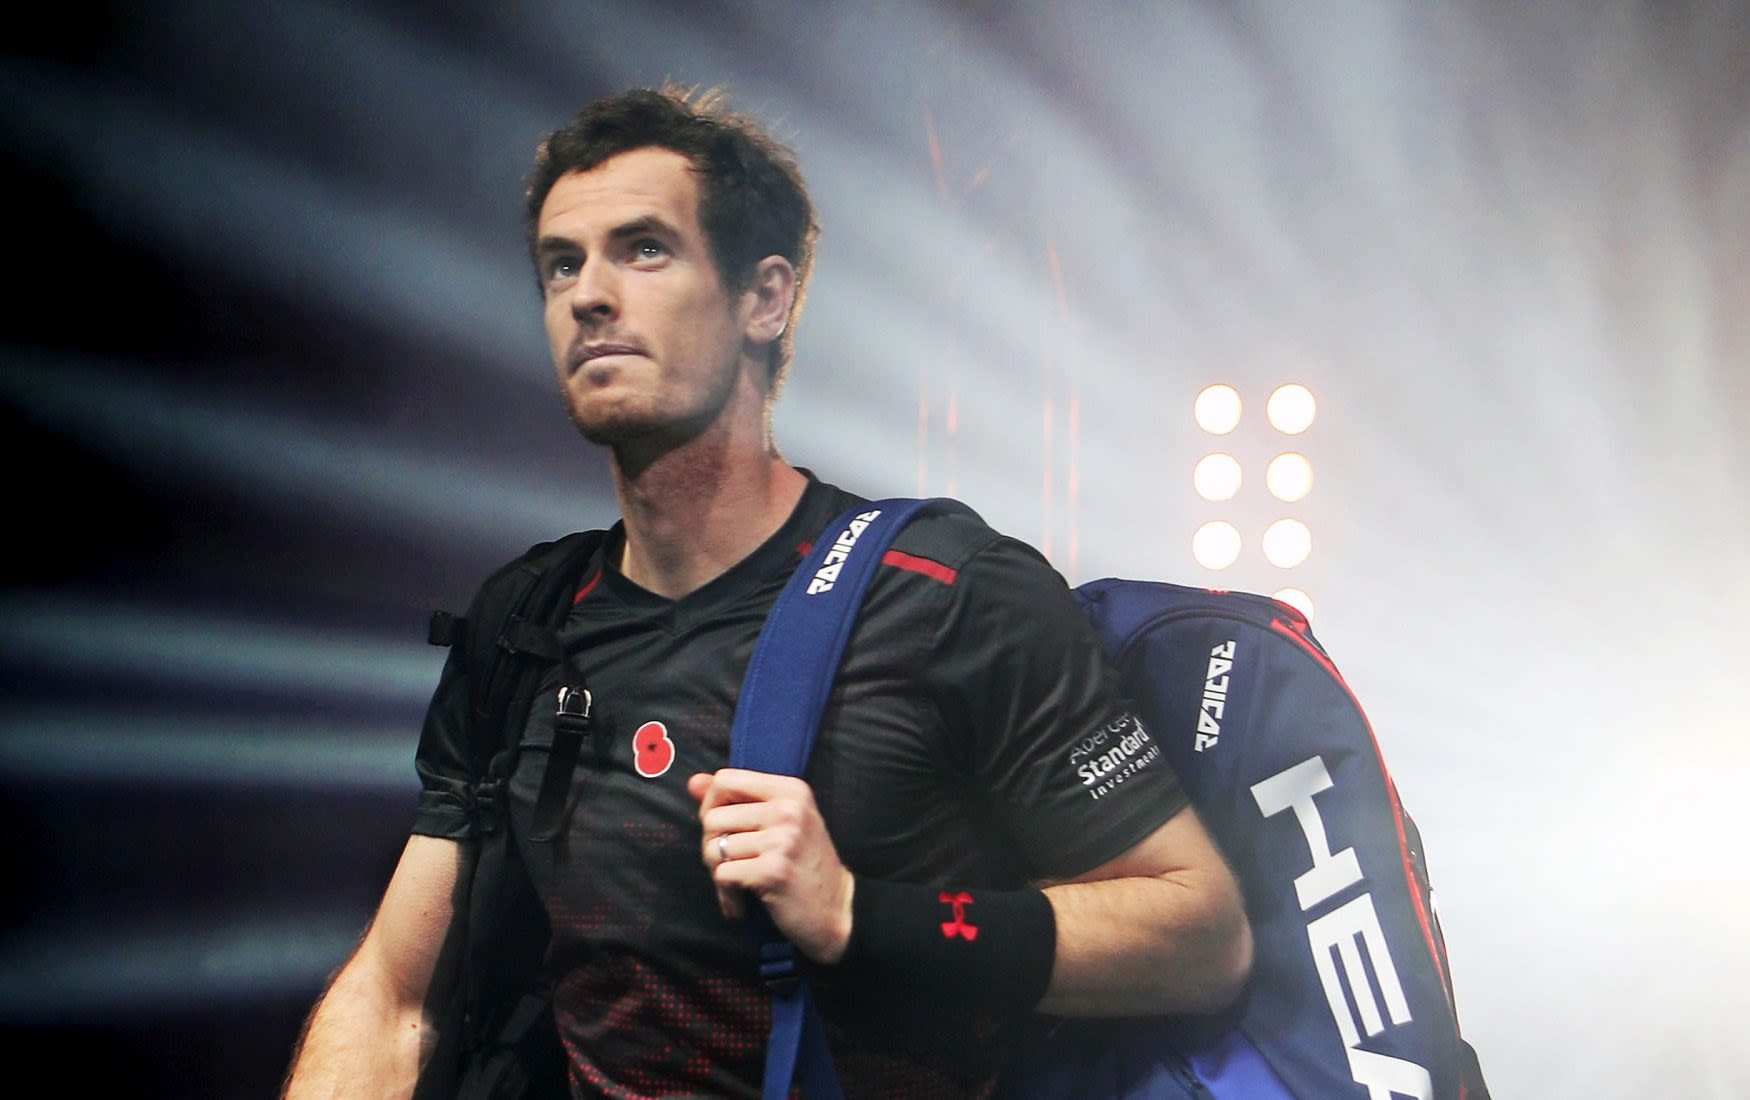 Coaching, charity work or expanding his business empire? Here is what’s next for Andy Murray